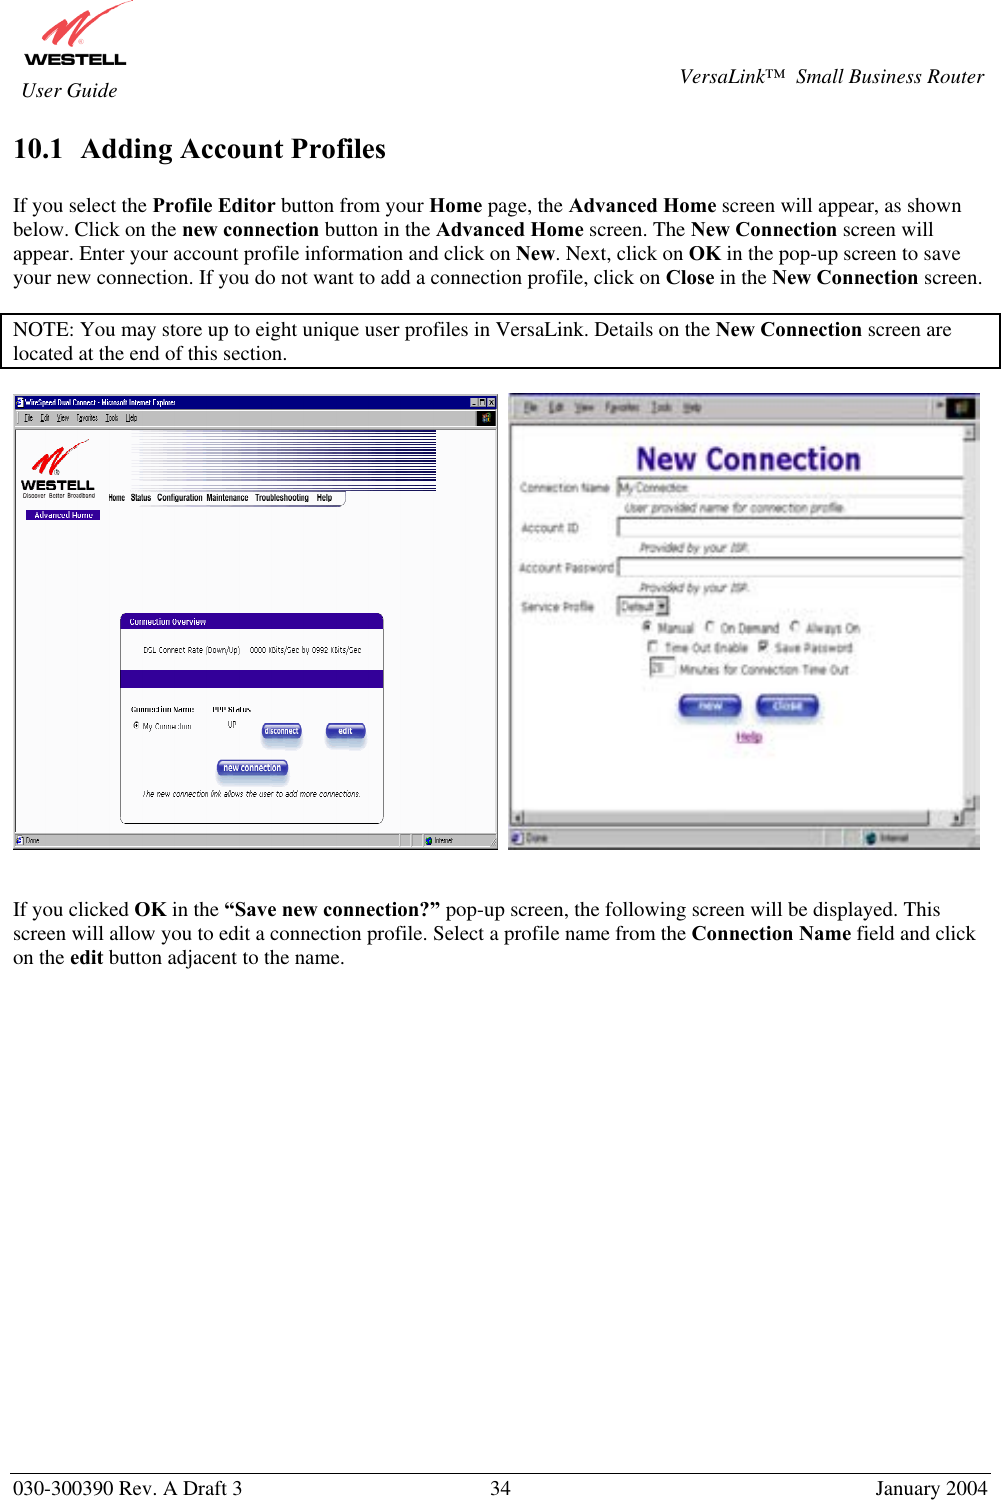       030-300390 Rev. A Draft 3  34  January 2004  VersaLink™  Small Business Router  User Guide 10.1  Adding Account Profiles  If you select the Profile Editor button from your Home page, the Advanced Home screen will appear, as shown below. Click on the new connection button in the Advanced Home screen. The New Connection screen will appear. Enter your account profile information and click on New. Next, click on OK in the pop-up screen to save your new connection. If you do not want to add a connection profile, click on Close in the New Connection screen.   NOTE: You may store up to eight unique user profiles in VersaLink. Details on the New Connection screen are located at the end of this section.        If you clicked OK in the “Save new connection?” pop-up screen, the following screen will be displayed. This screen will allow you to edit a connection profile. Select a profile name from the Connection Name field and click on the edit button adjacent to the name.  